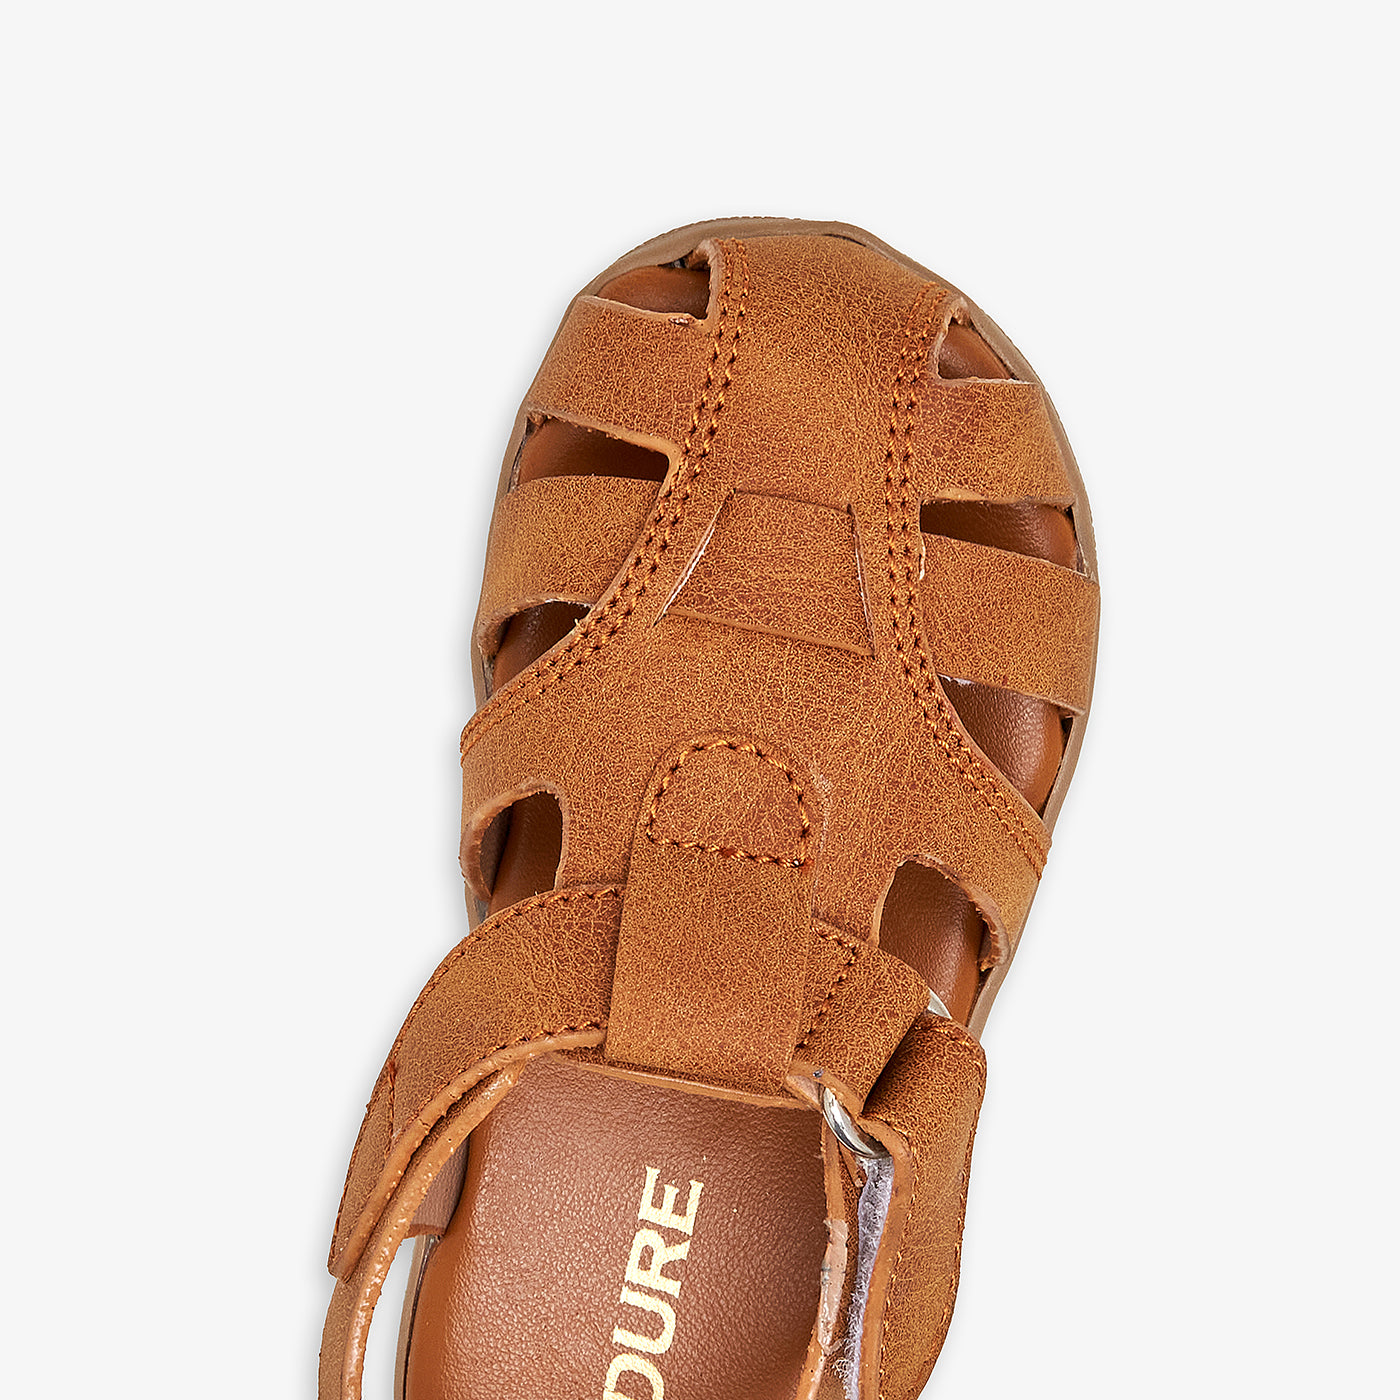 Boys Caged Sandals